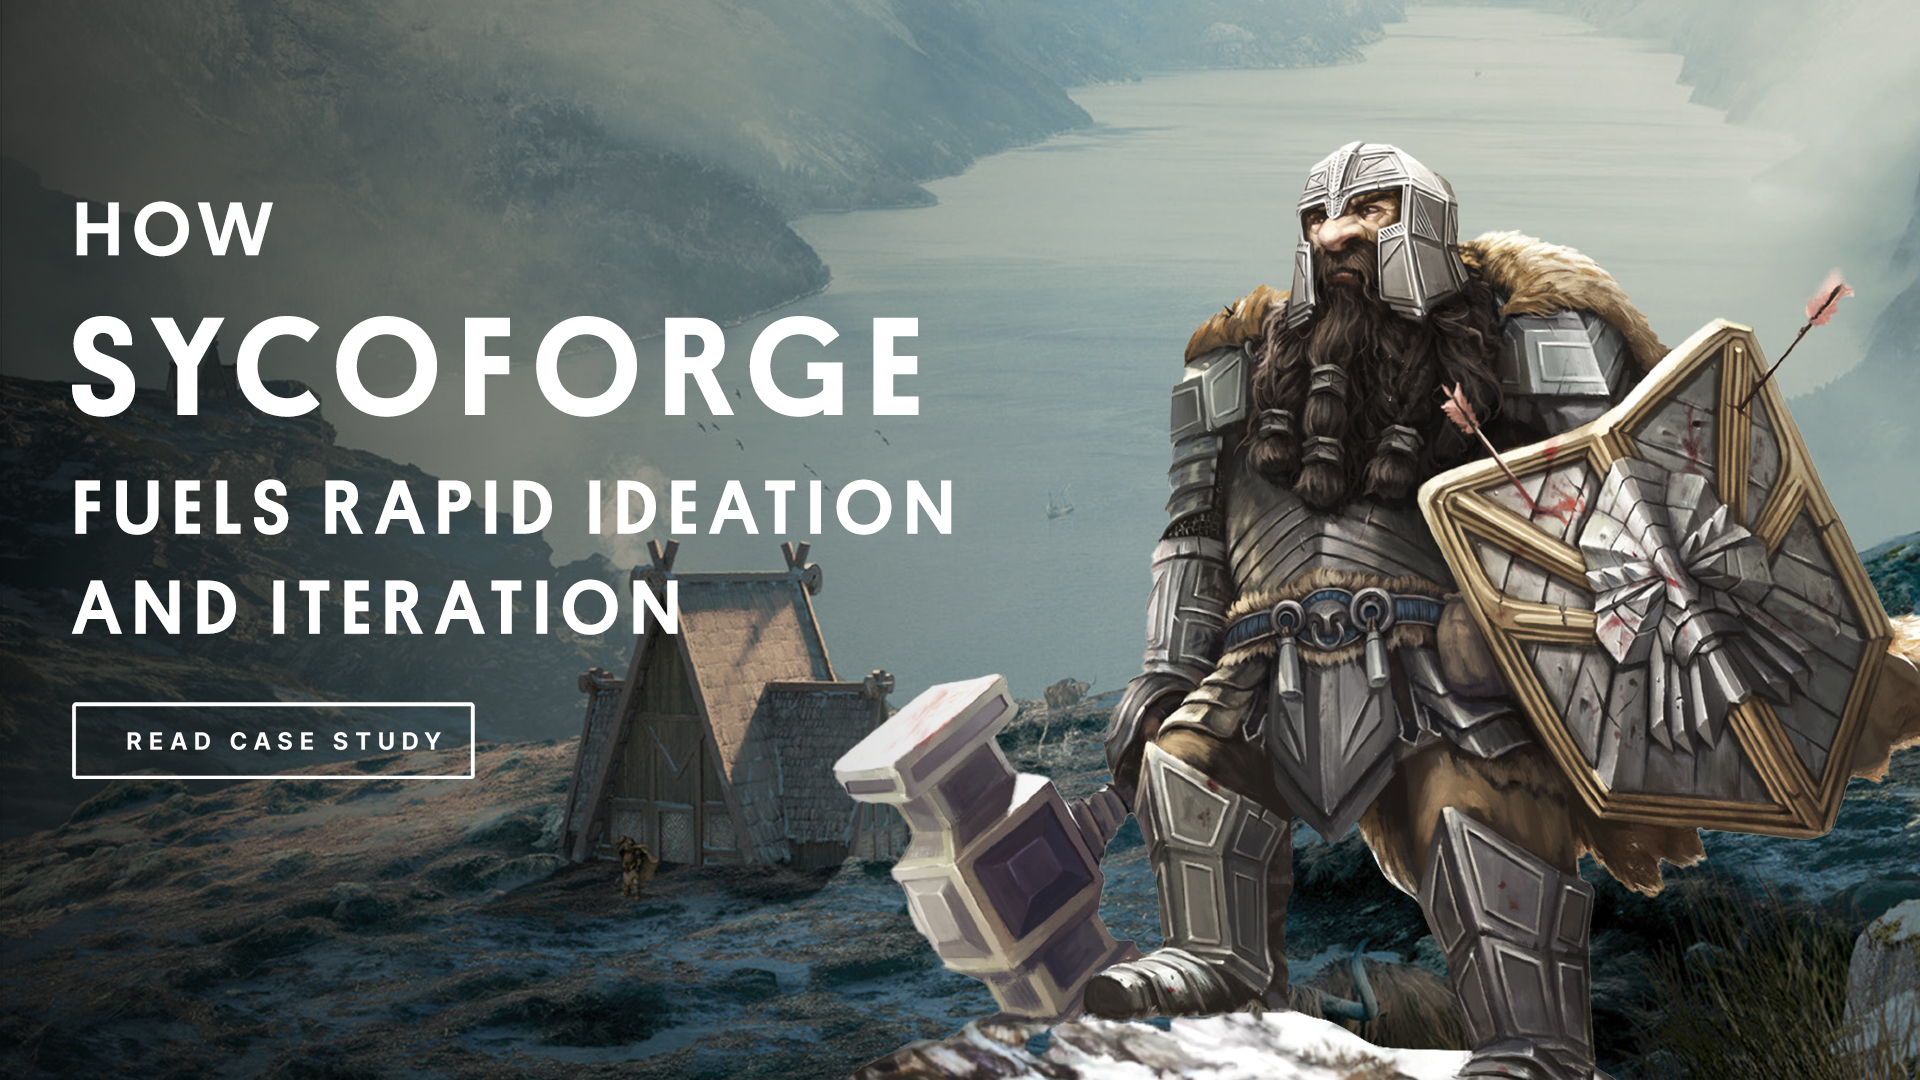 A dwarf in armor is holding a shield and an axe atop a mountain under a cloudy sky, and a text saying "Sycoforge:Read the Case Study" is next to him